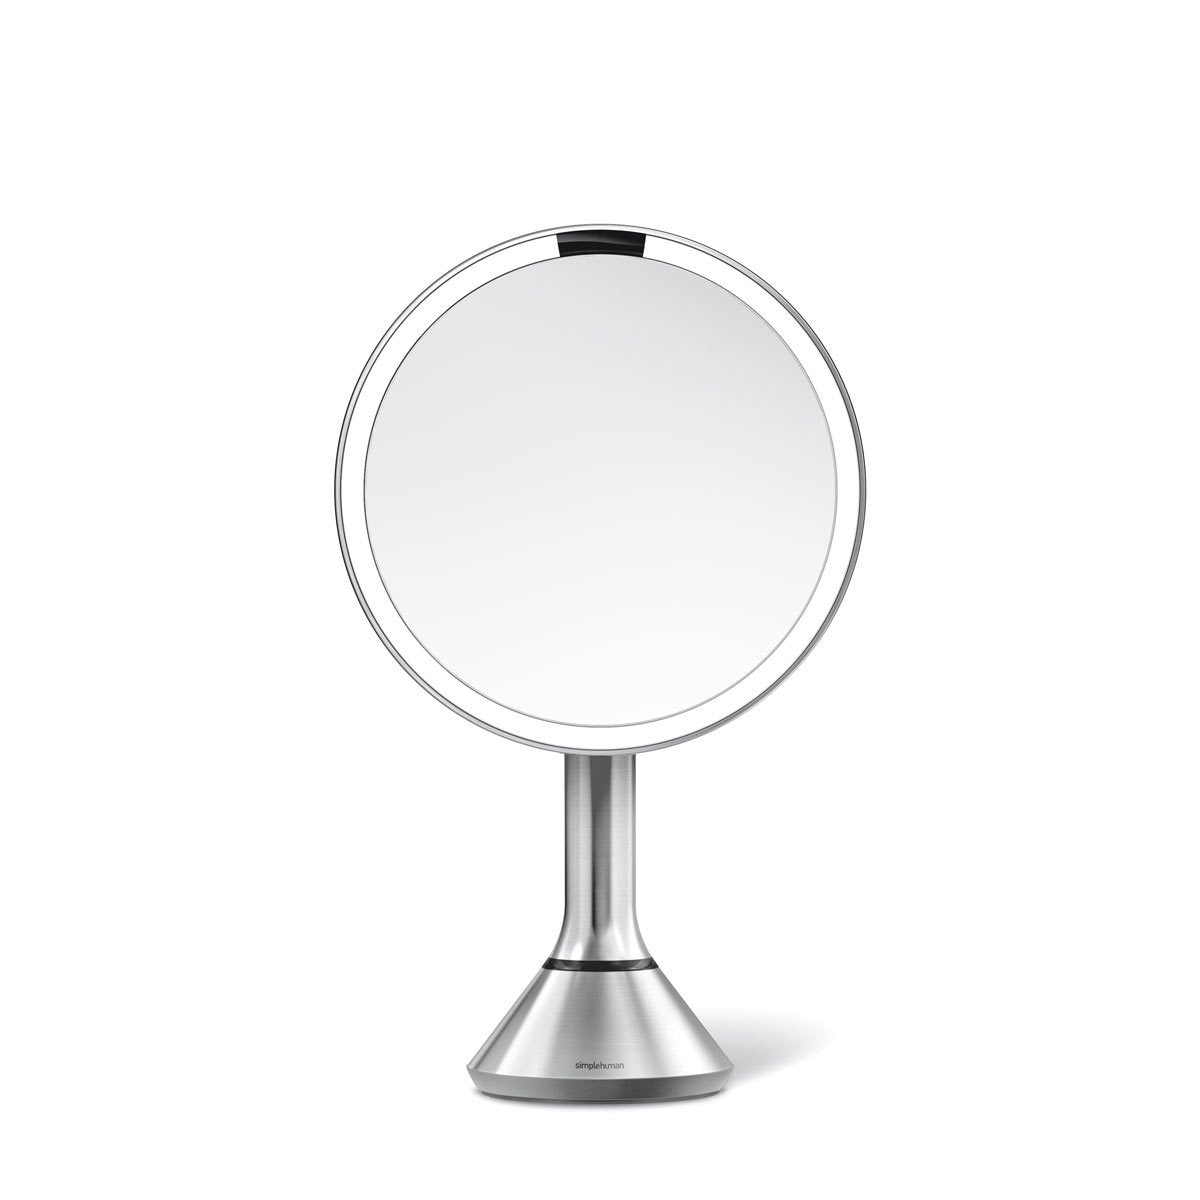 sensor mirror round with touch-control brightness product support